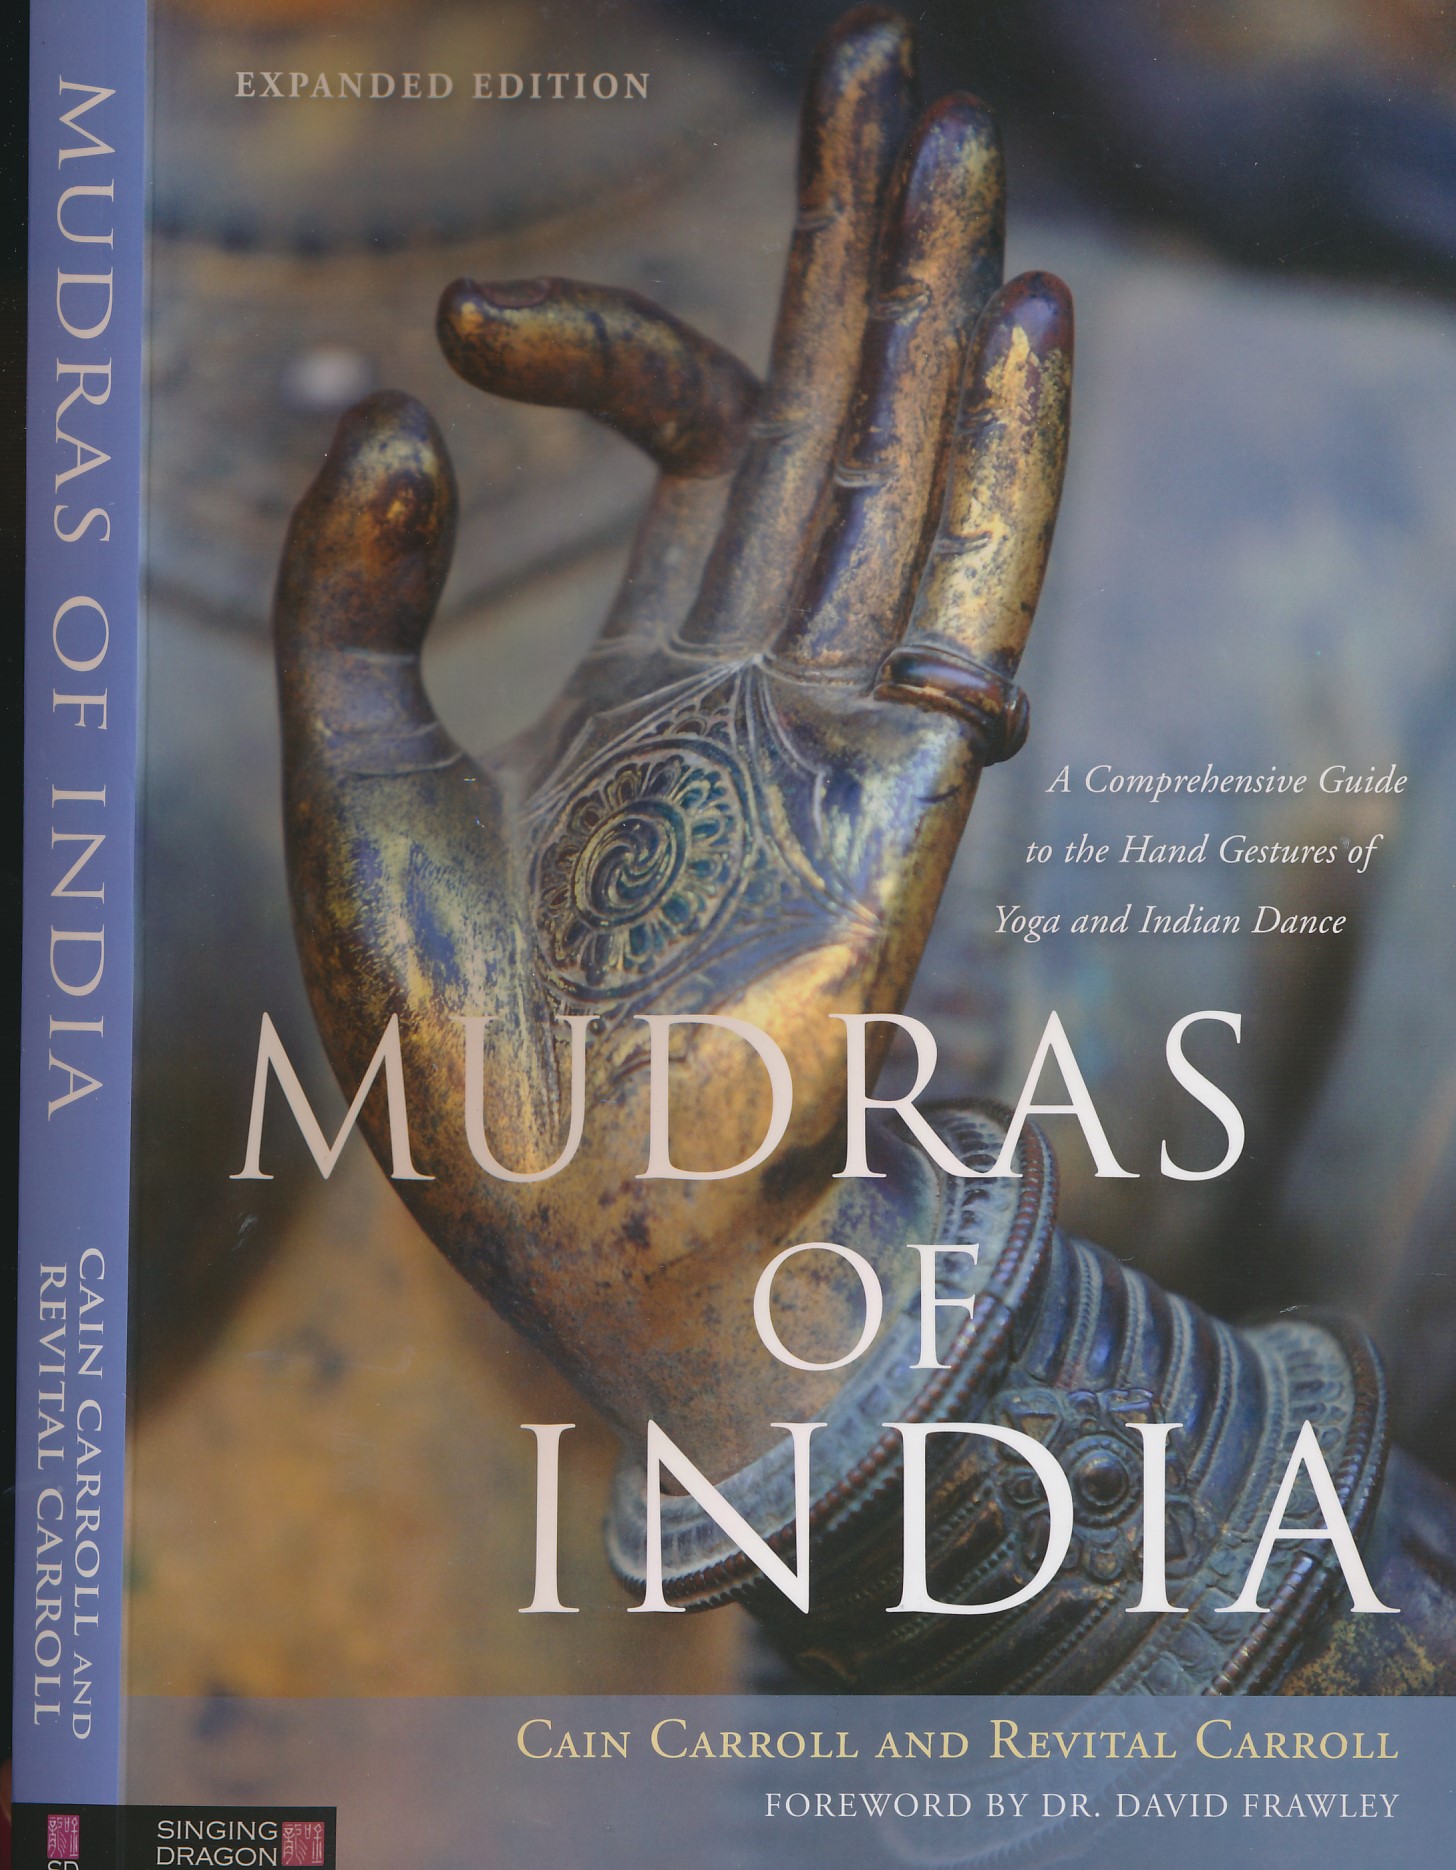 Mudras of India. A Comprehensive Guide to the Hand Gestures of Yoga and Indian Dance